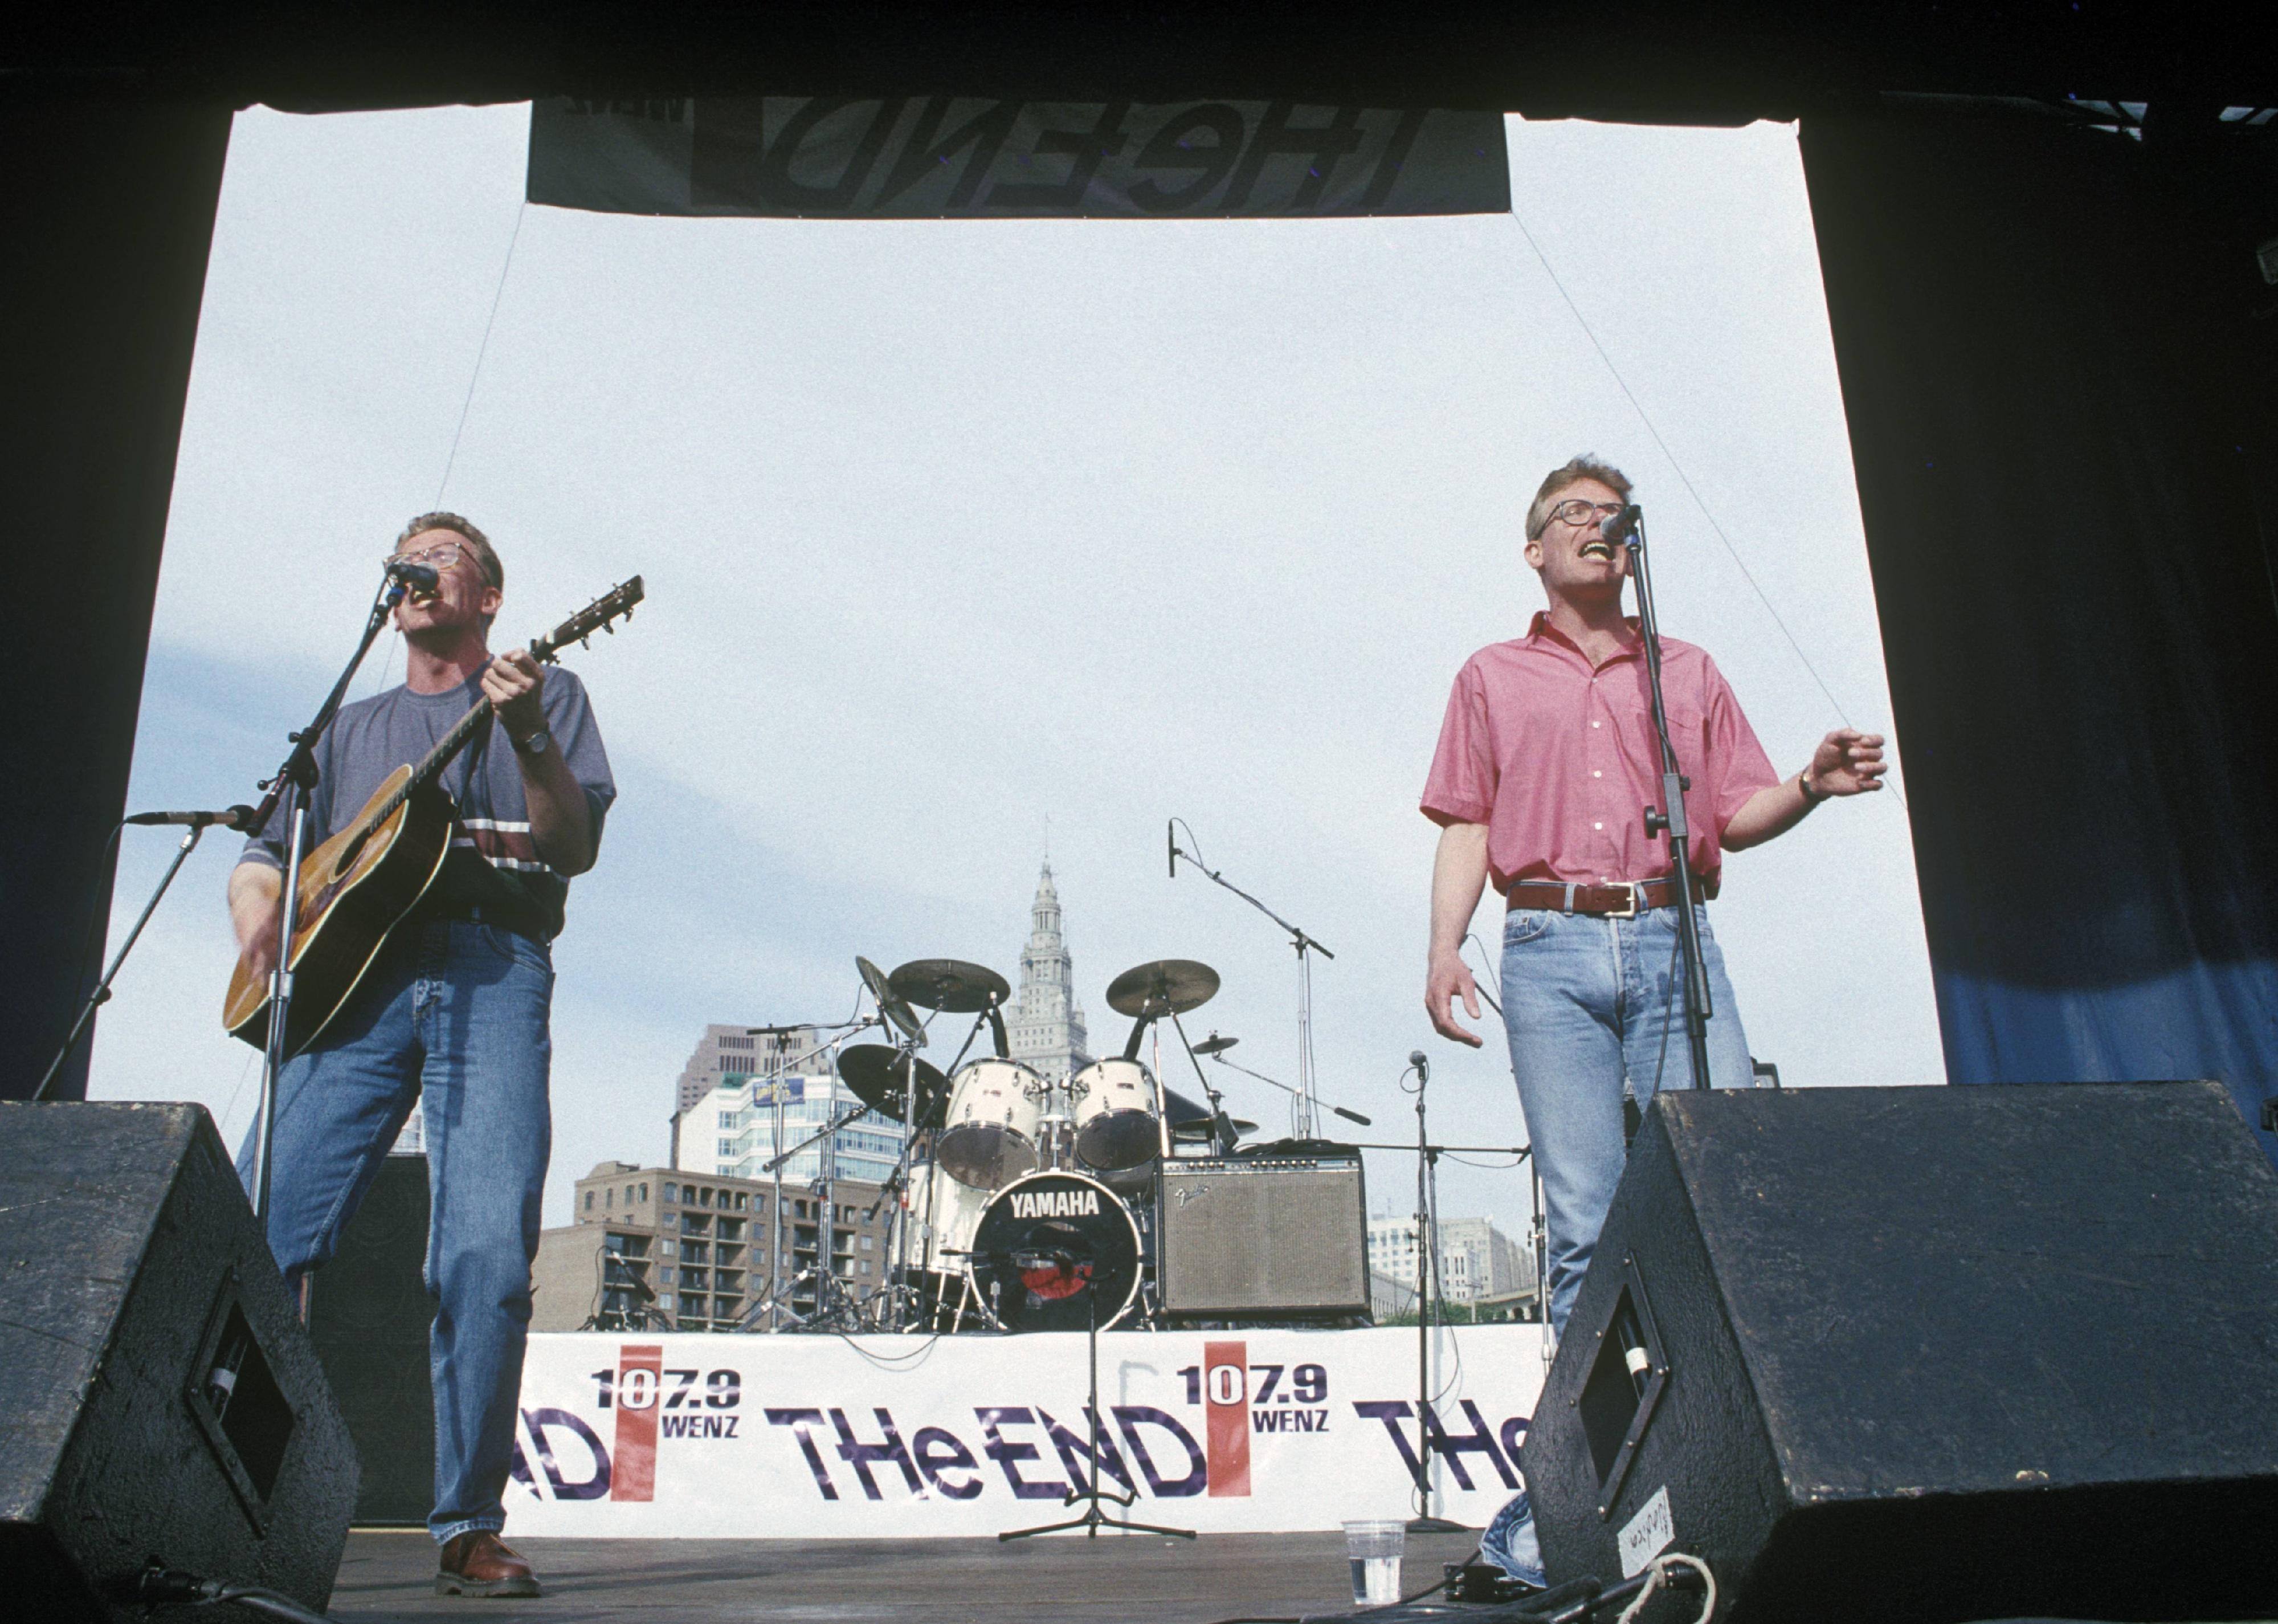 The Proclaimers performing on stage outside.